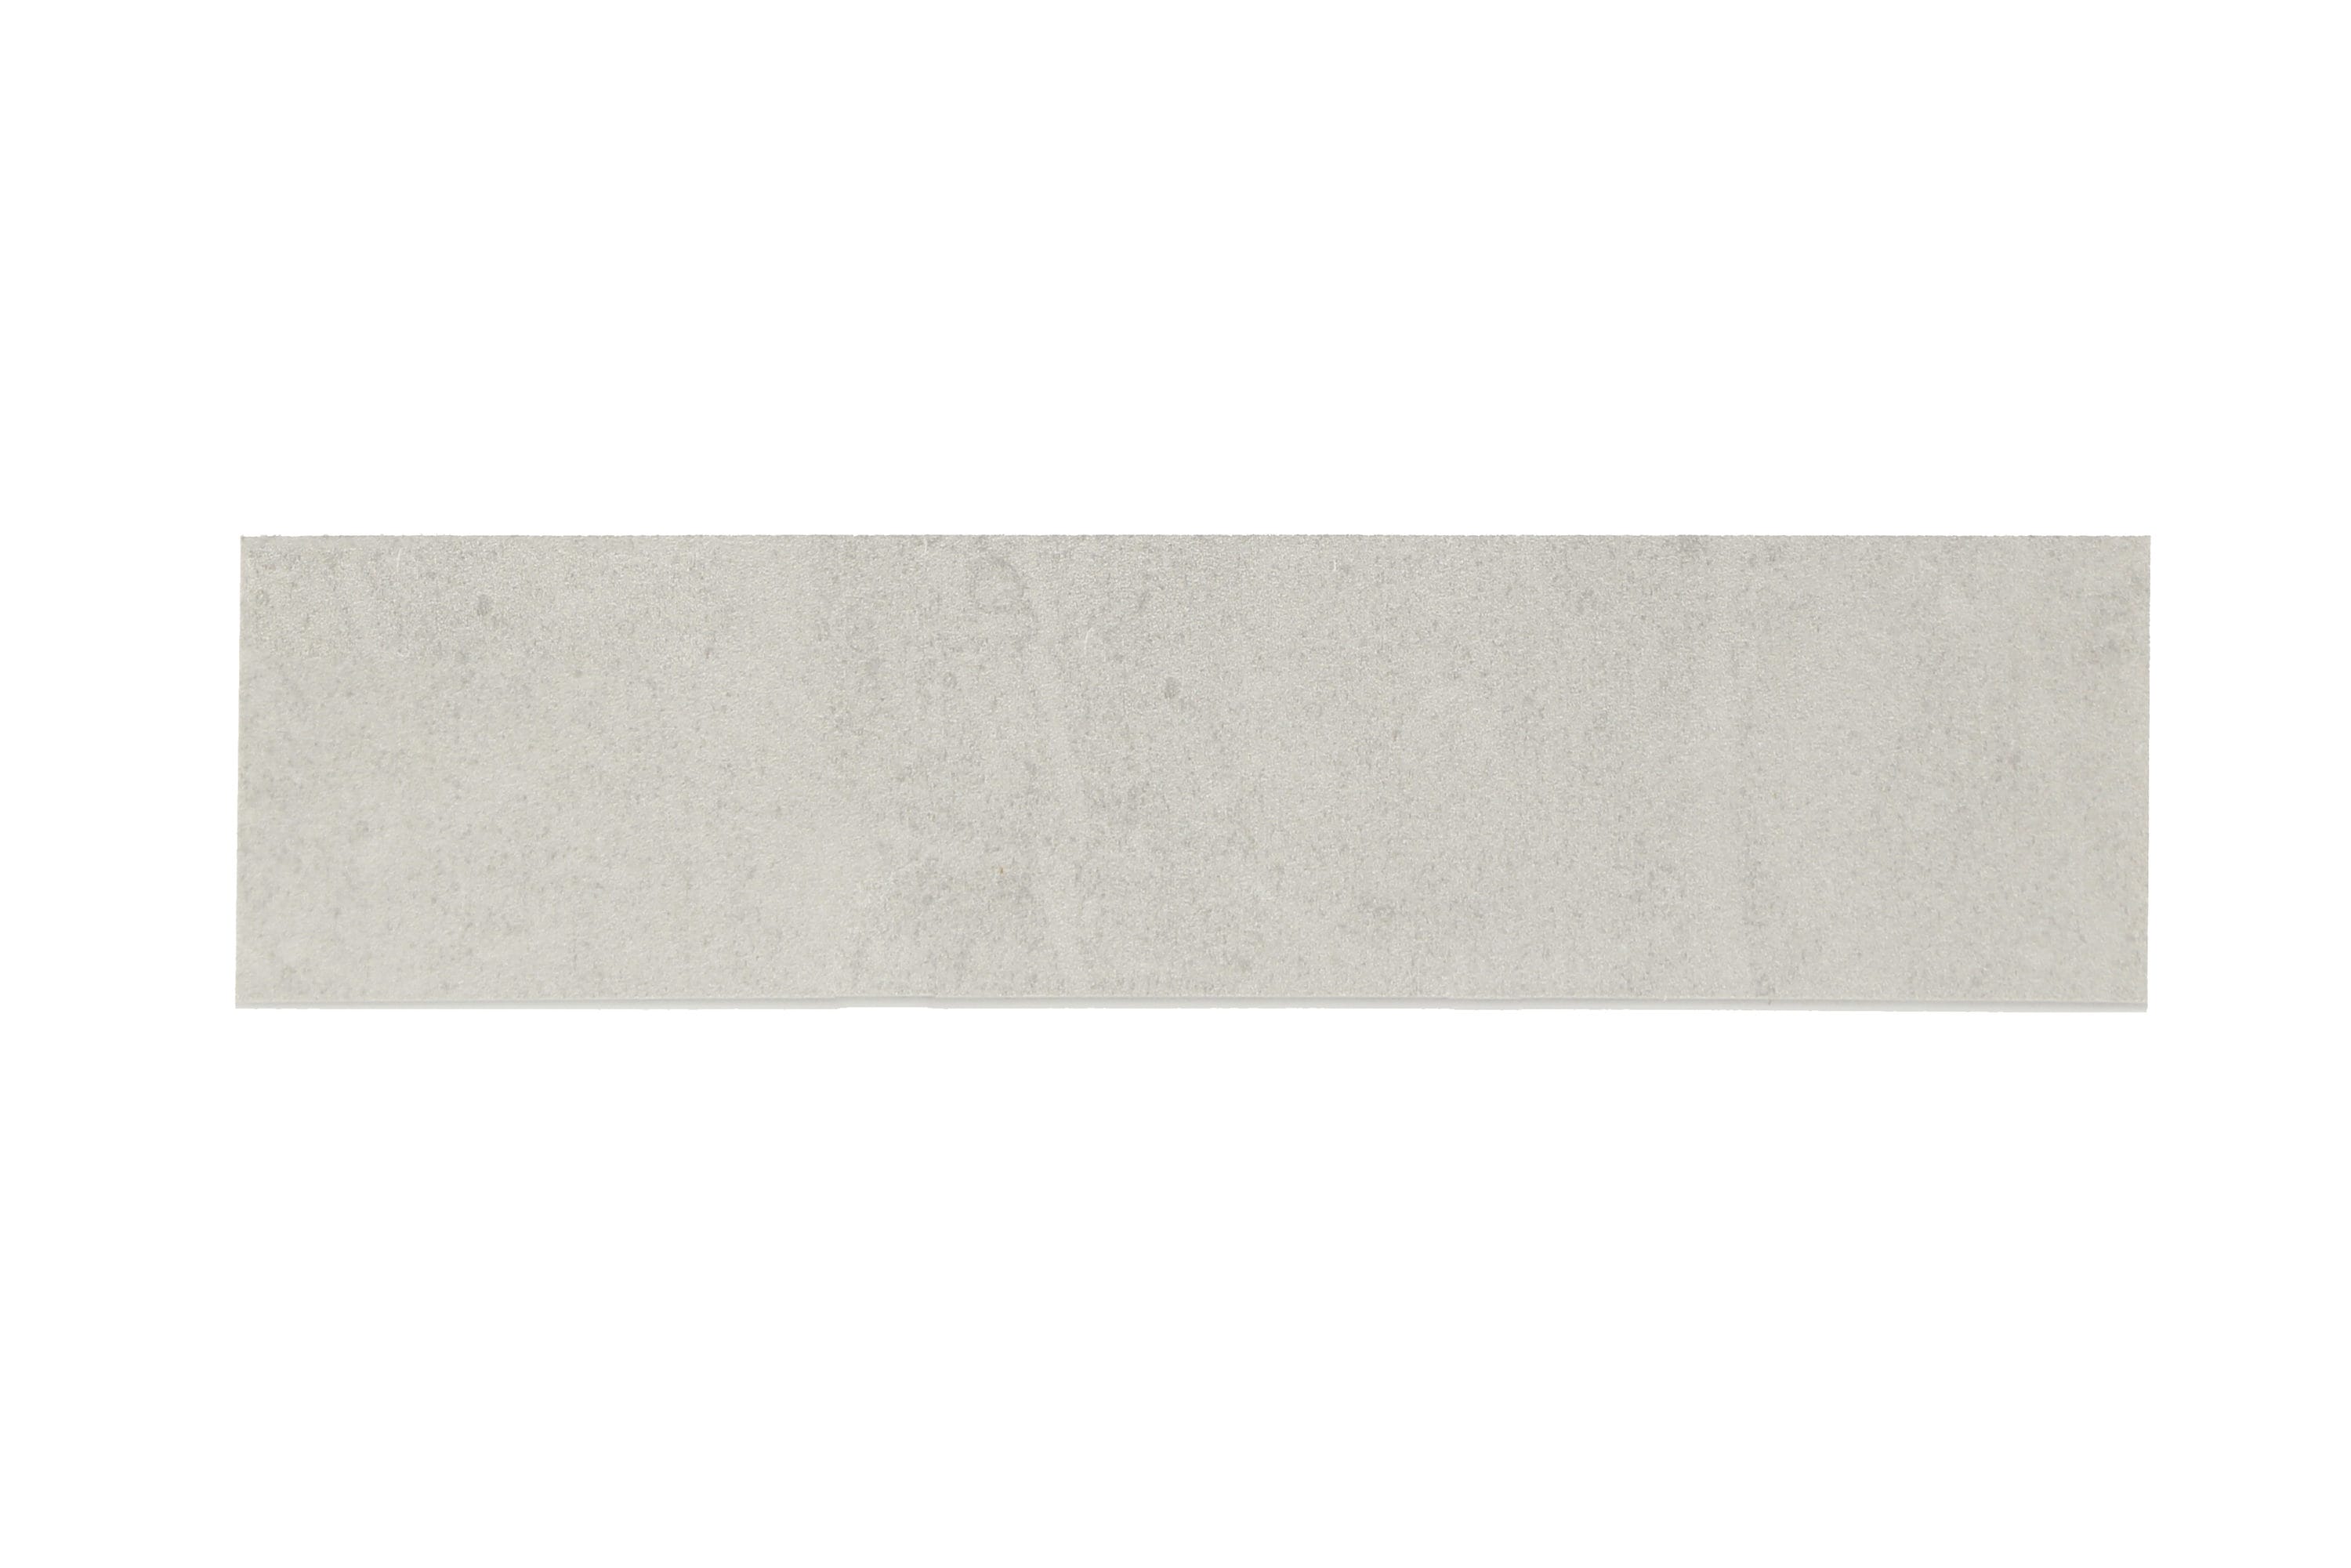 Gallery Grey 3-in x 12-in Porcelain Bullnose Tile (0.23-sq. ft/ Piece) in Light | - GBI Tile & Stone Inc. 1694012